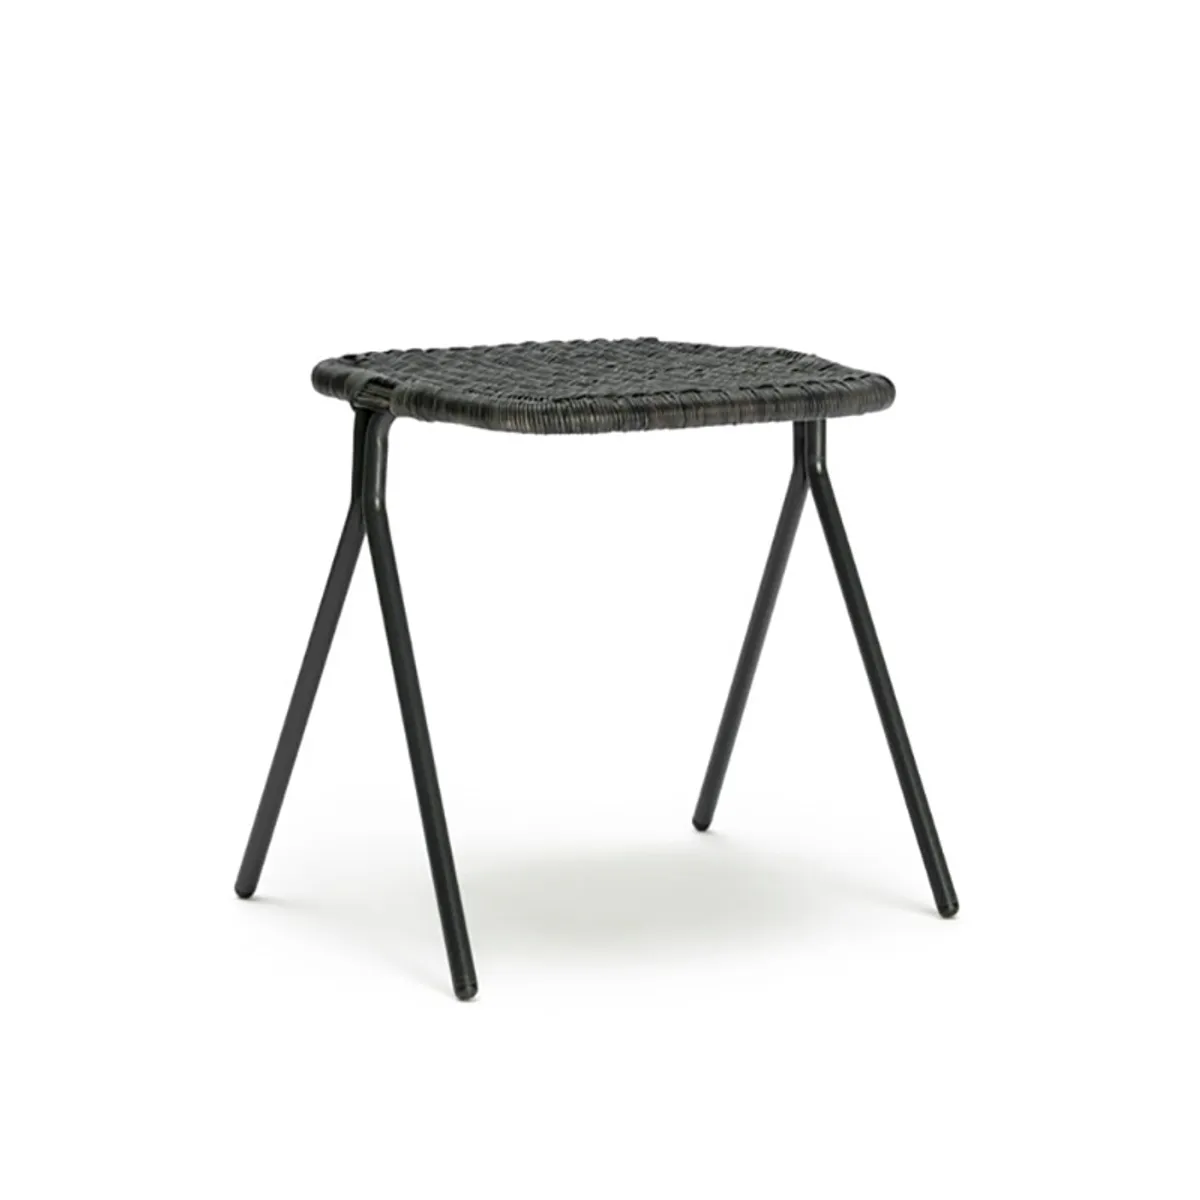 Persi Low Stool Lead Grey Rattan And Metal Stool For Casual Cafes J